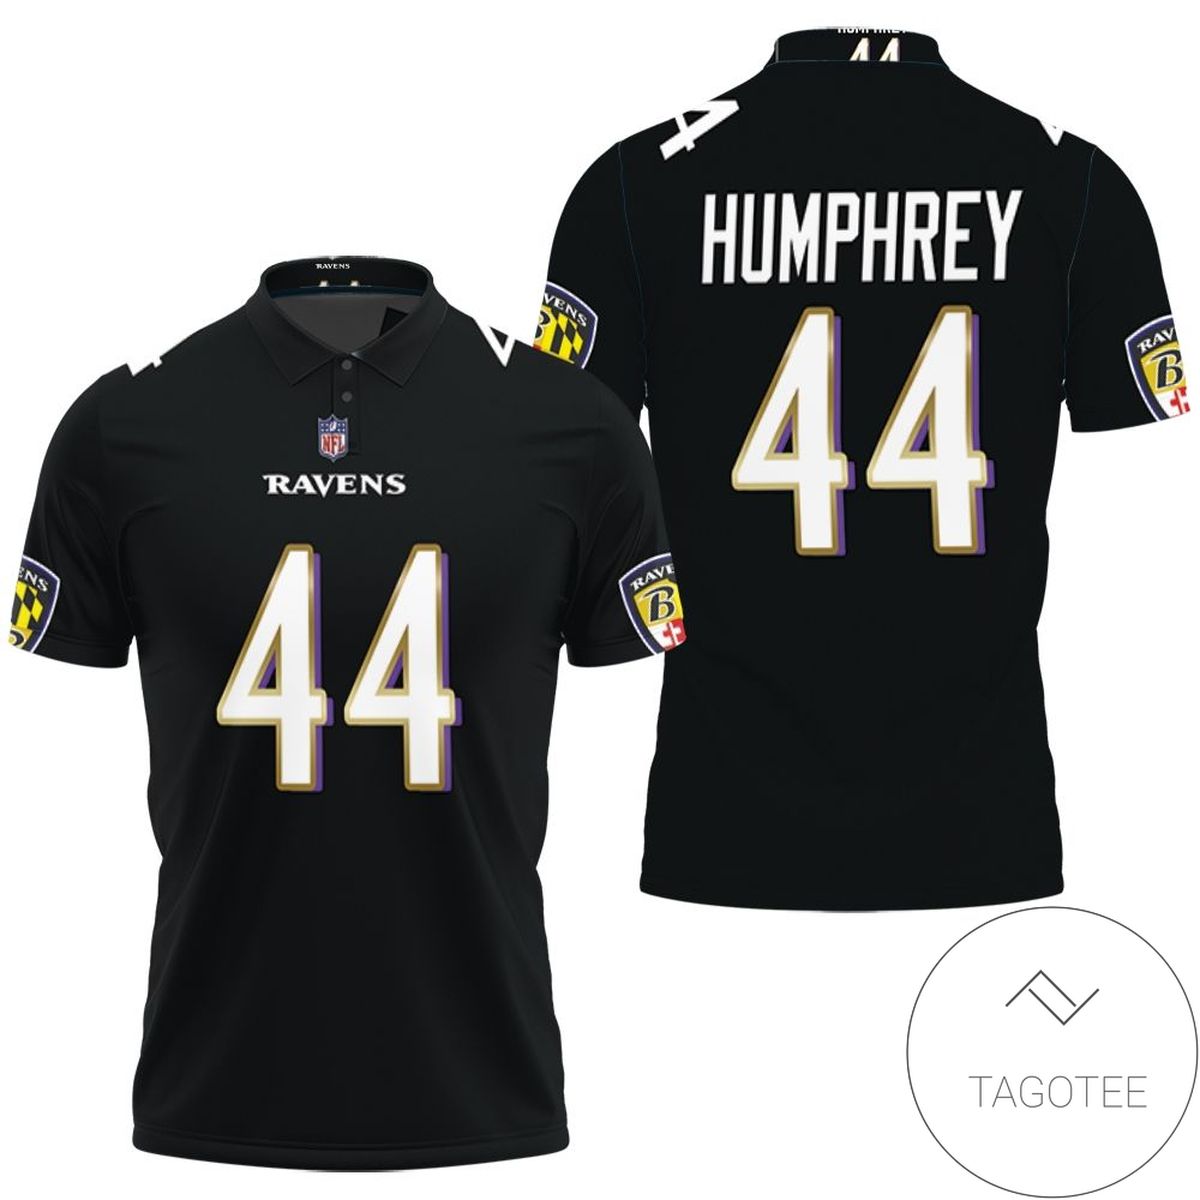 3D Baltimore Ravens Marlon Humphrey #44 Great Player Nfl American Football Game Jersey Black 2019 3d Designed Allover Gift For Ravens Fans All Over Print Polo Shirt